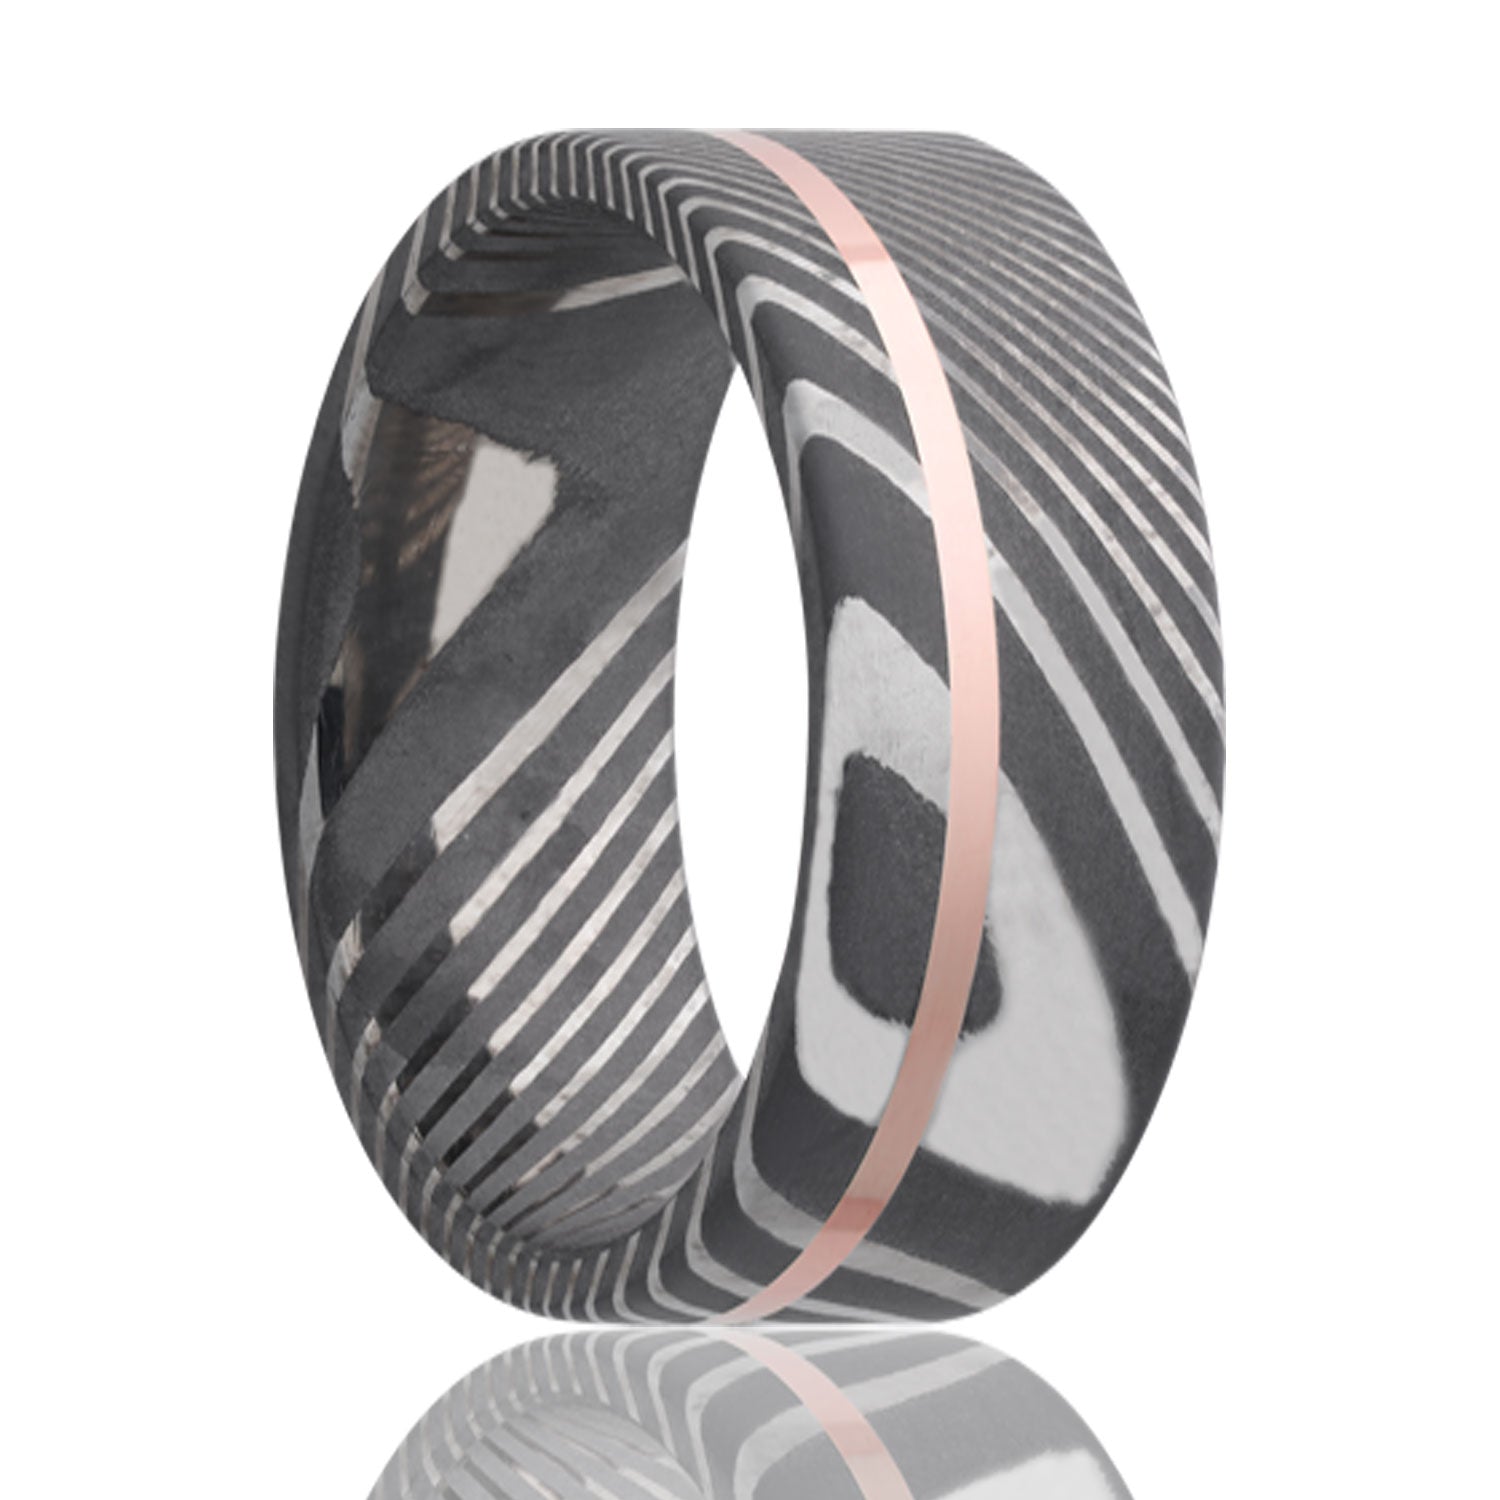 A asymmetrical 14k rose gold inlay damascus steel men's wedding band displayed on a neutral white background.